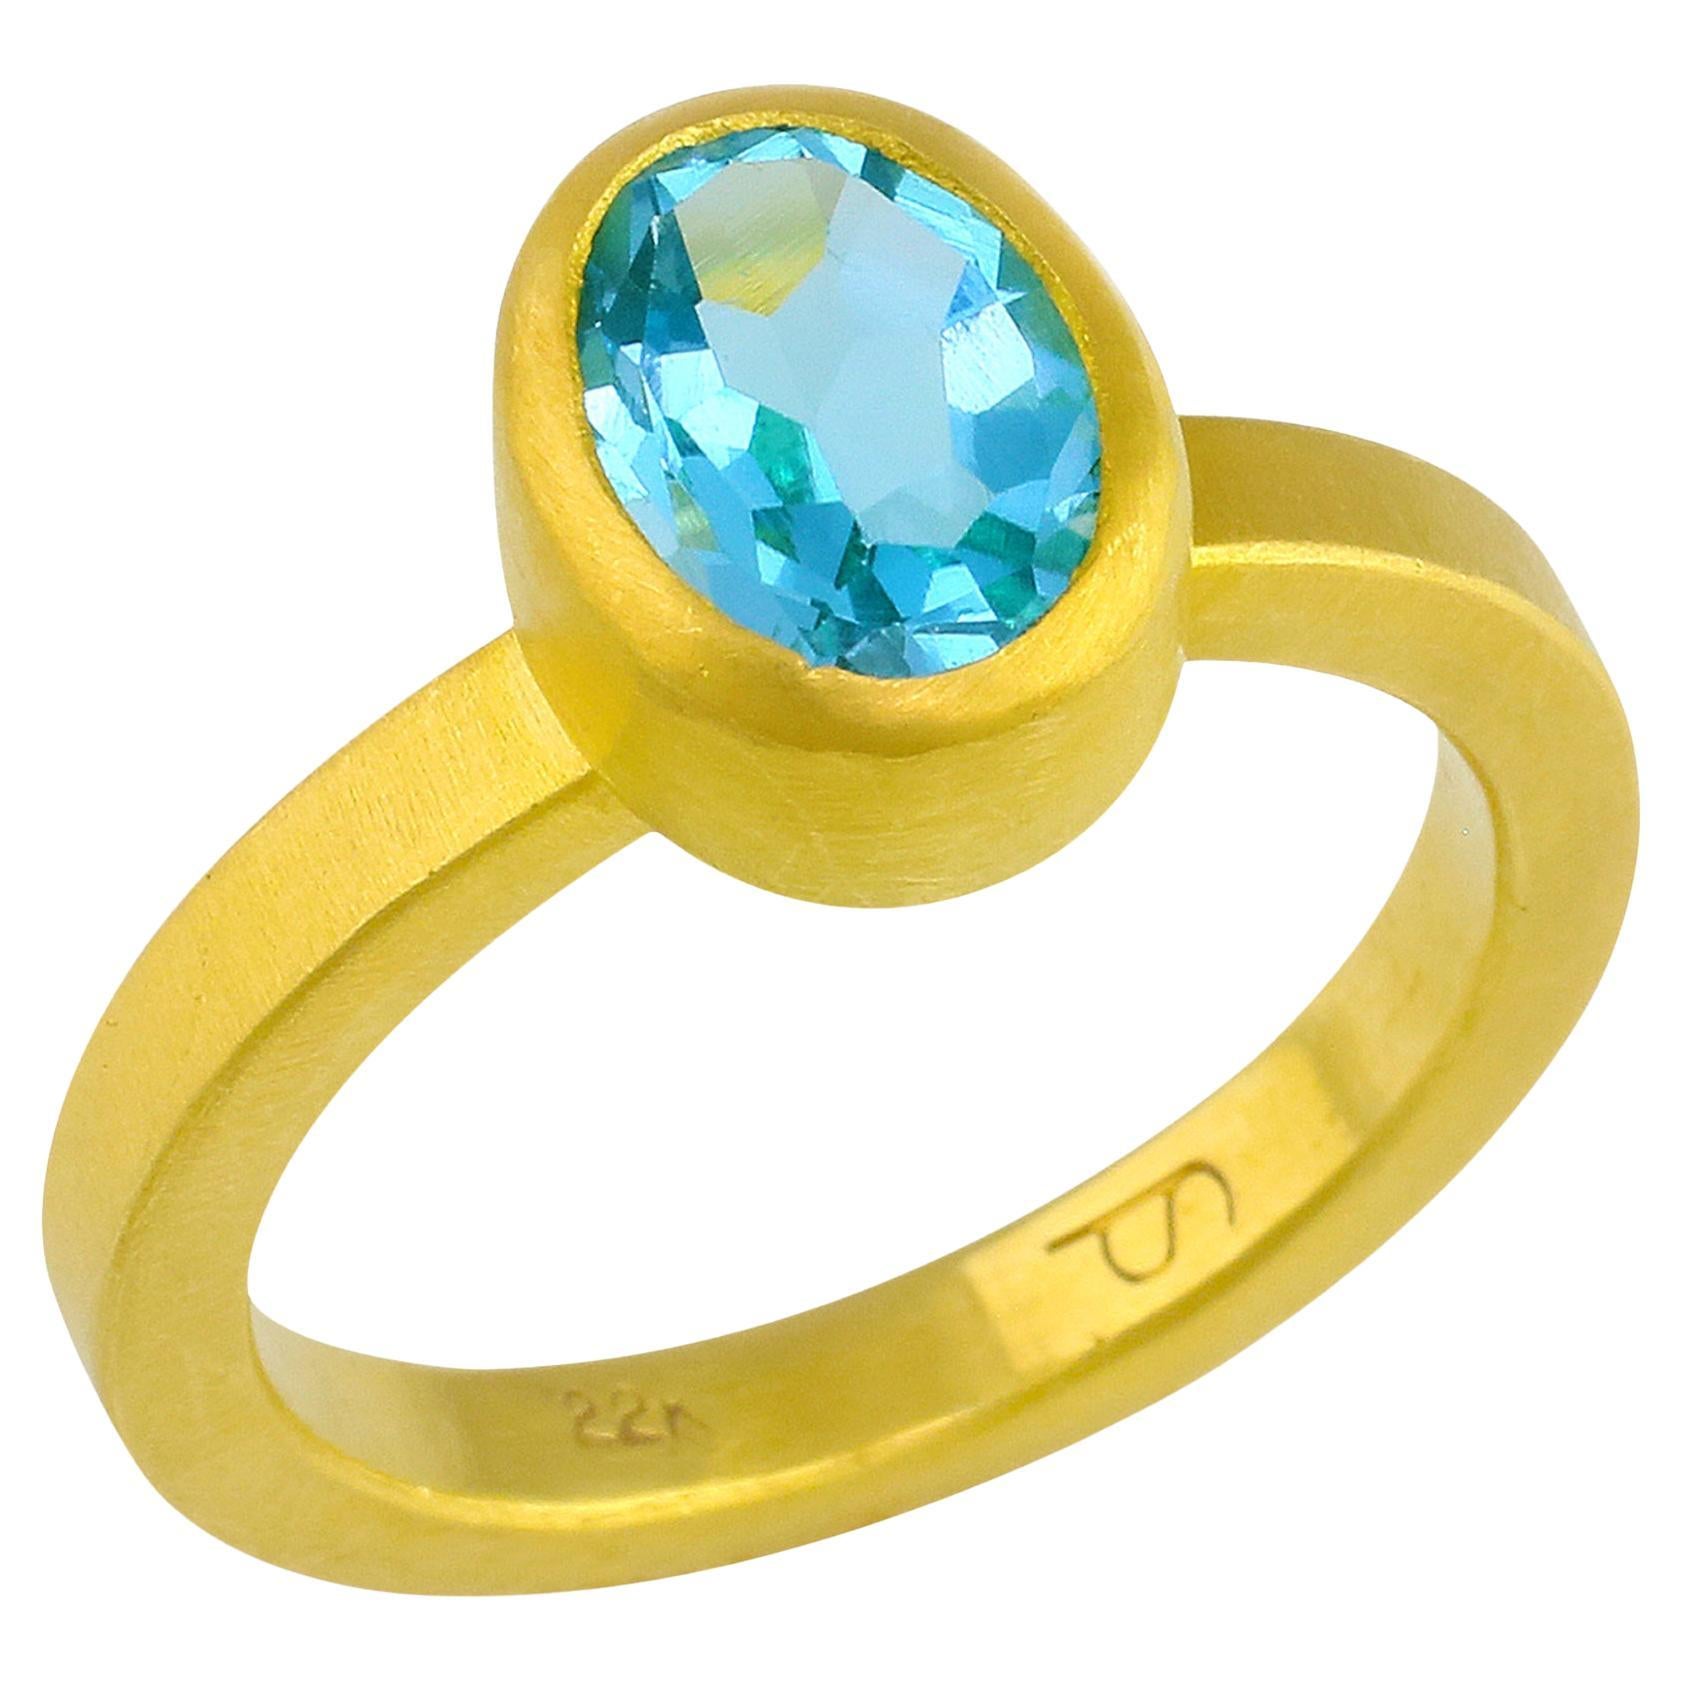 PHILIPPE SPENCER 2.15 Ct. Blue Topaz Solitaire Ring in 22K Gold